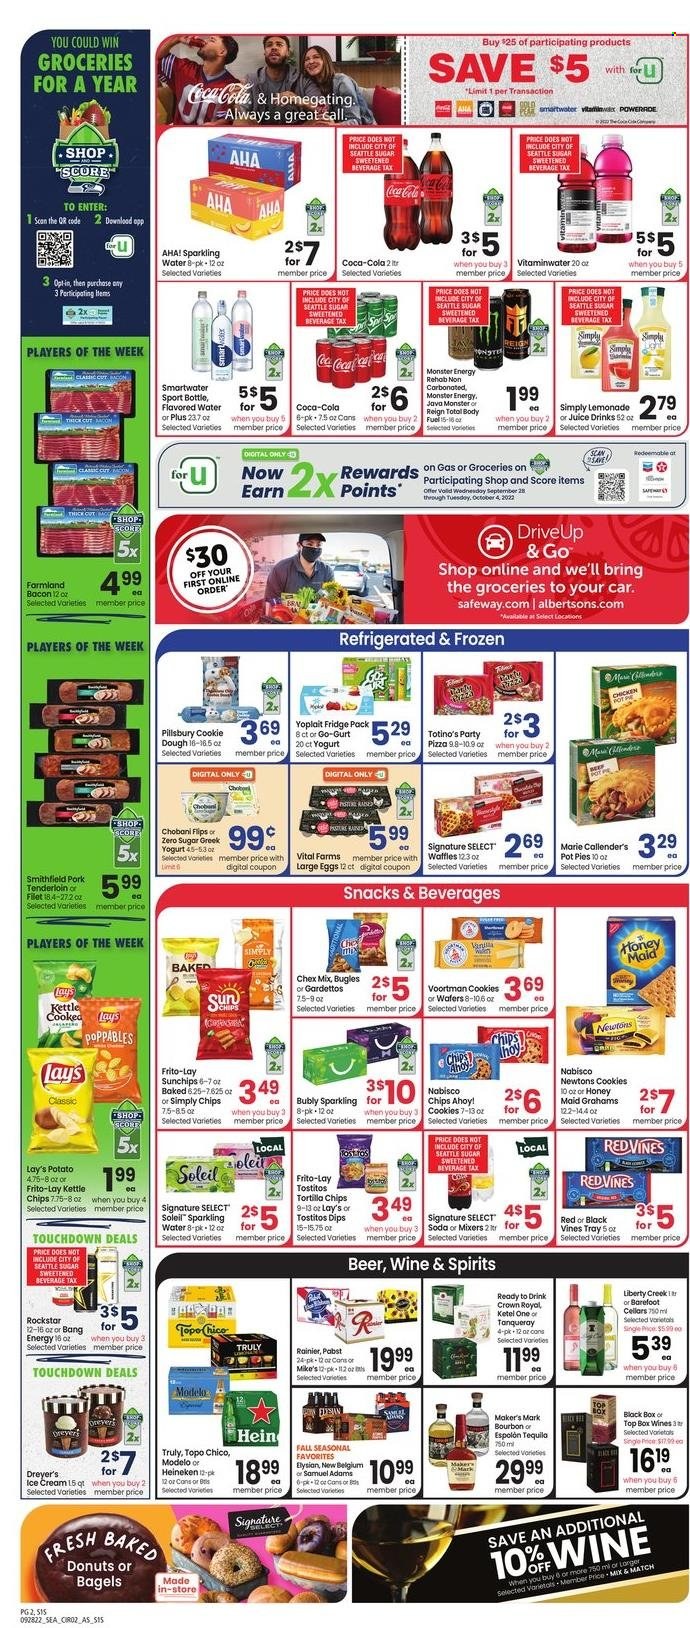 thumbnail - Safeway Flyer - 09/28/2022 - 10/04/2022 - Sales products - bagels, donut, waffles, pork meat, pork tenderloin, pizza, Pillsbury, Marie Callender's, bacon, greek yoghurt, yoghurt, Yoplait, Chobani, large eggs, cookie dough, cookies, wafers, snack, Chips Ahoy!, tortilla chips, Lay’s, Frito-Lay, Tostitos, Chex Mix, Honey Maid, Coca-Cola, lemonade, Powerade, juice, Monster, Monster Energy, Rockstar, flavored water, soda, sparkling water, Smartwater, wine, bourbon, tequila, TRULY, beer, Heineken, Modelo, tray, pot, travel bottle. Page 2.